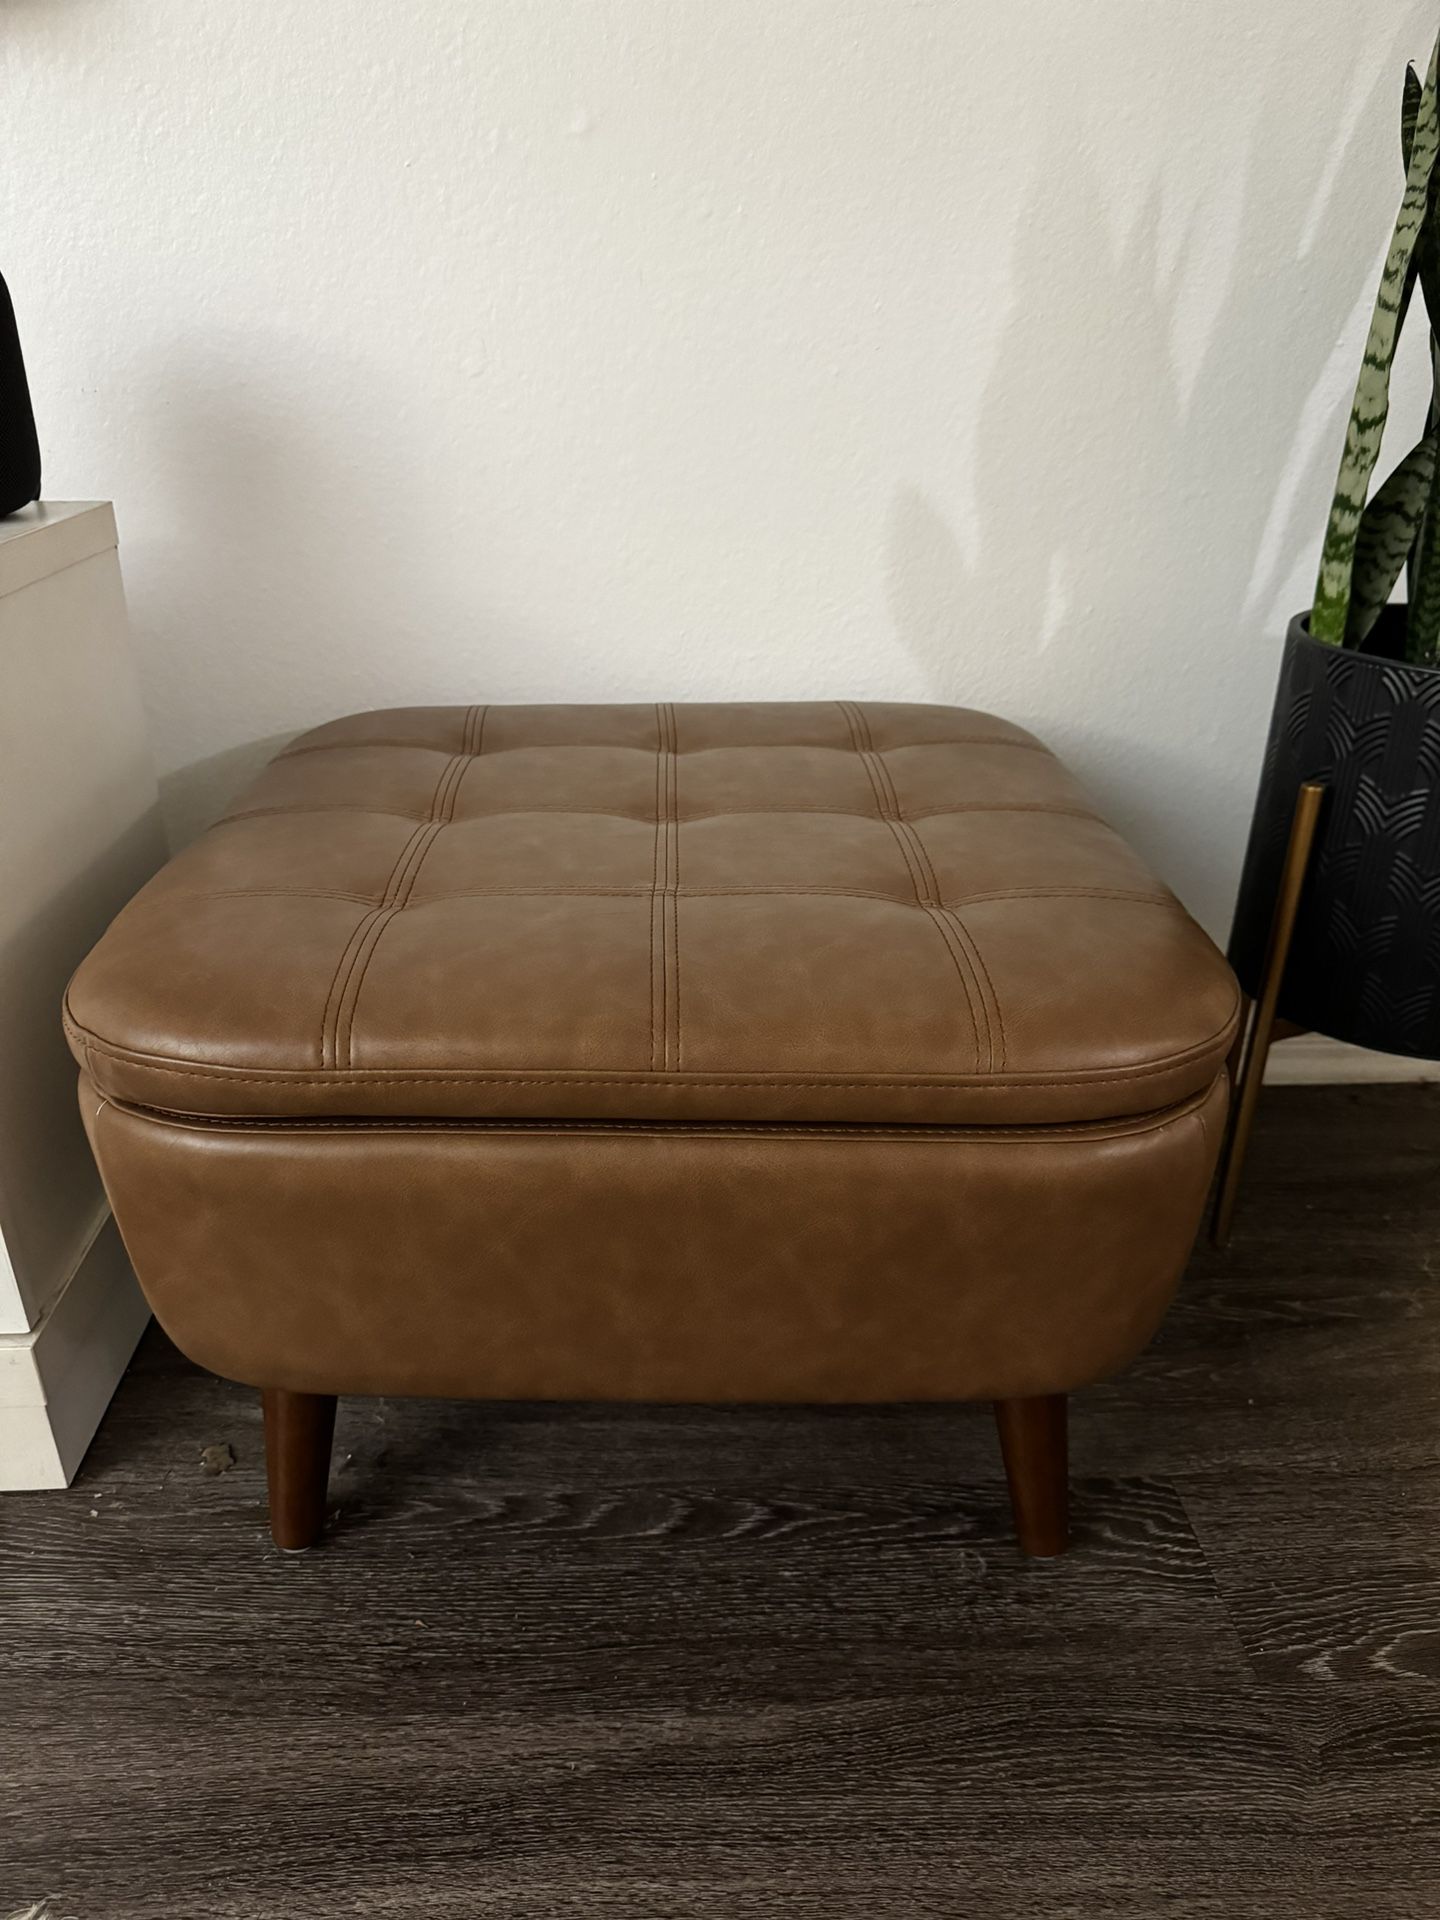 Living Room Ottoman With Storage